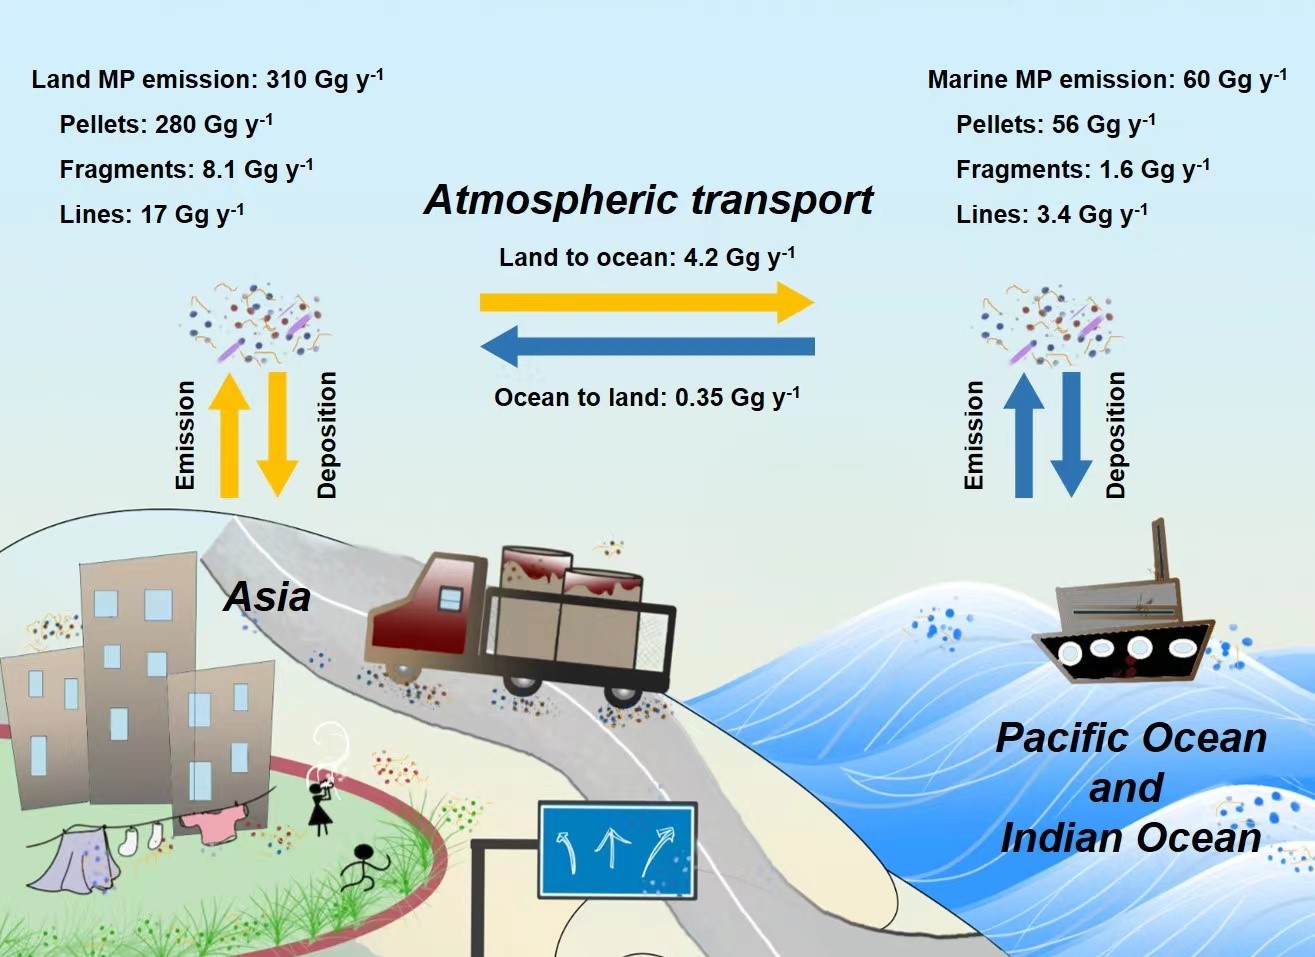 Researchers demonstrate efficient atmospheric transport of microplastics over Asia and adjacent oceans